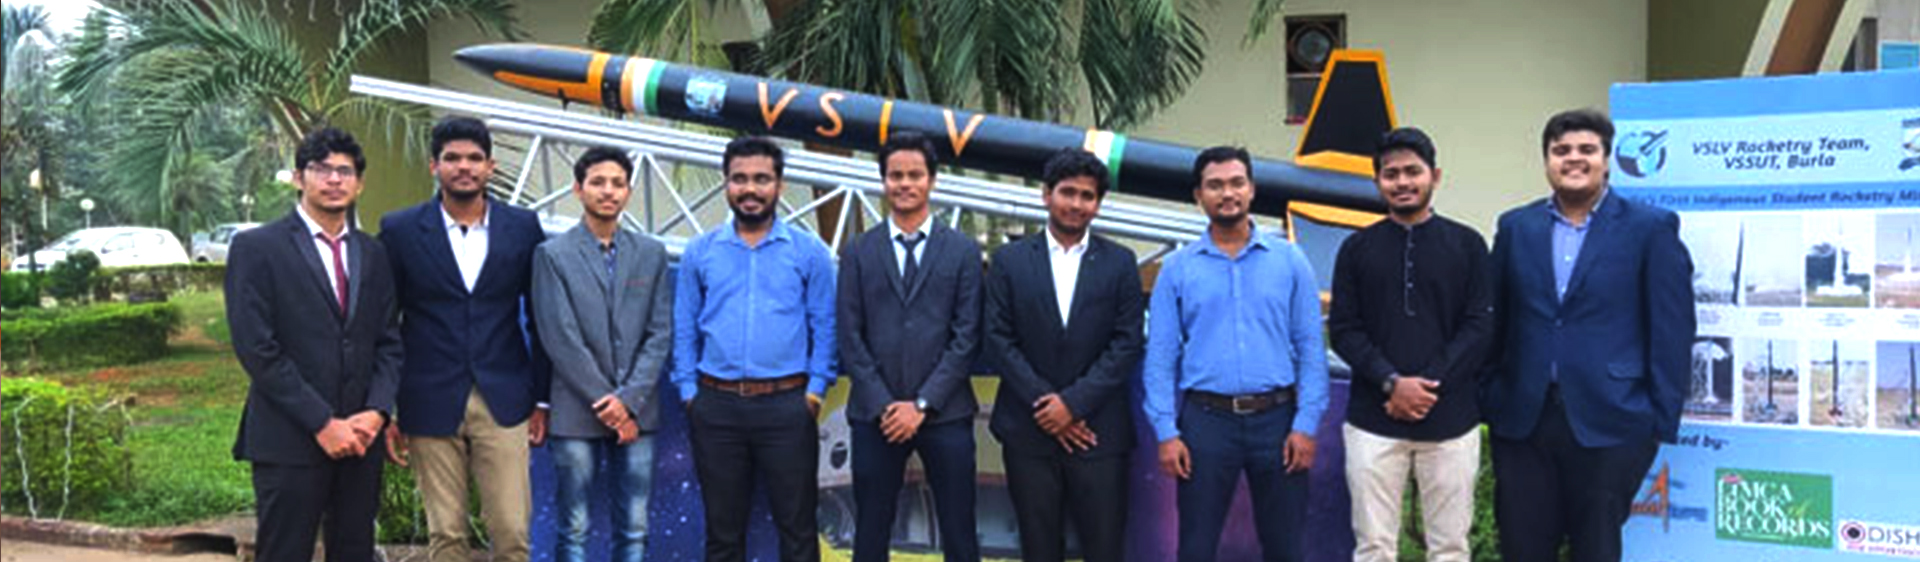 Team VSLV invited by TATA Steel to represent in Young Astronomer Talent Search 2019